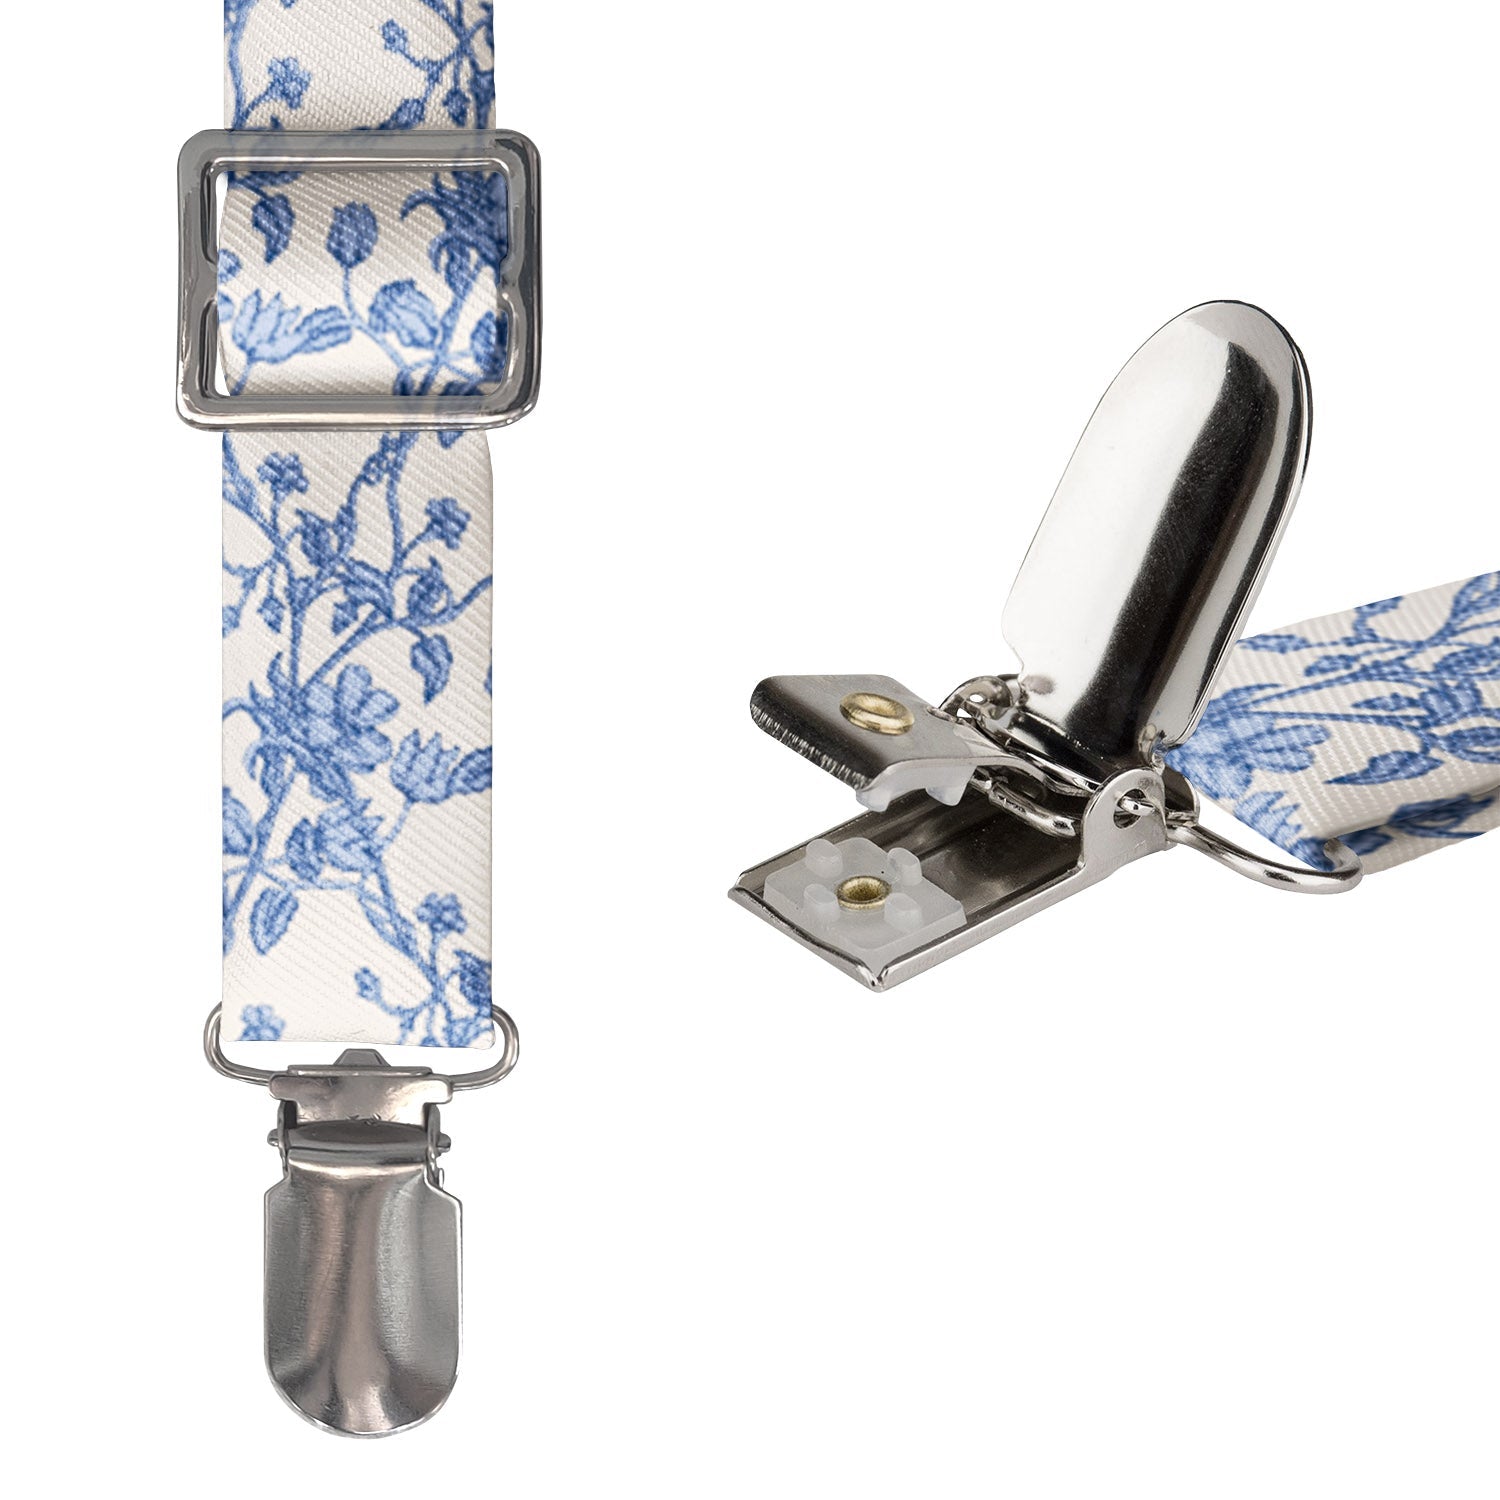 Floral Toile Suspenders -  -  - Knotty Tie Co.